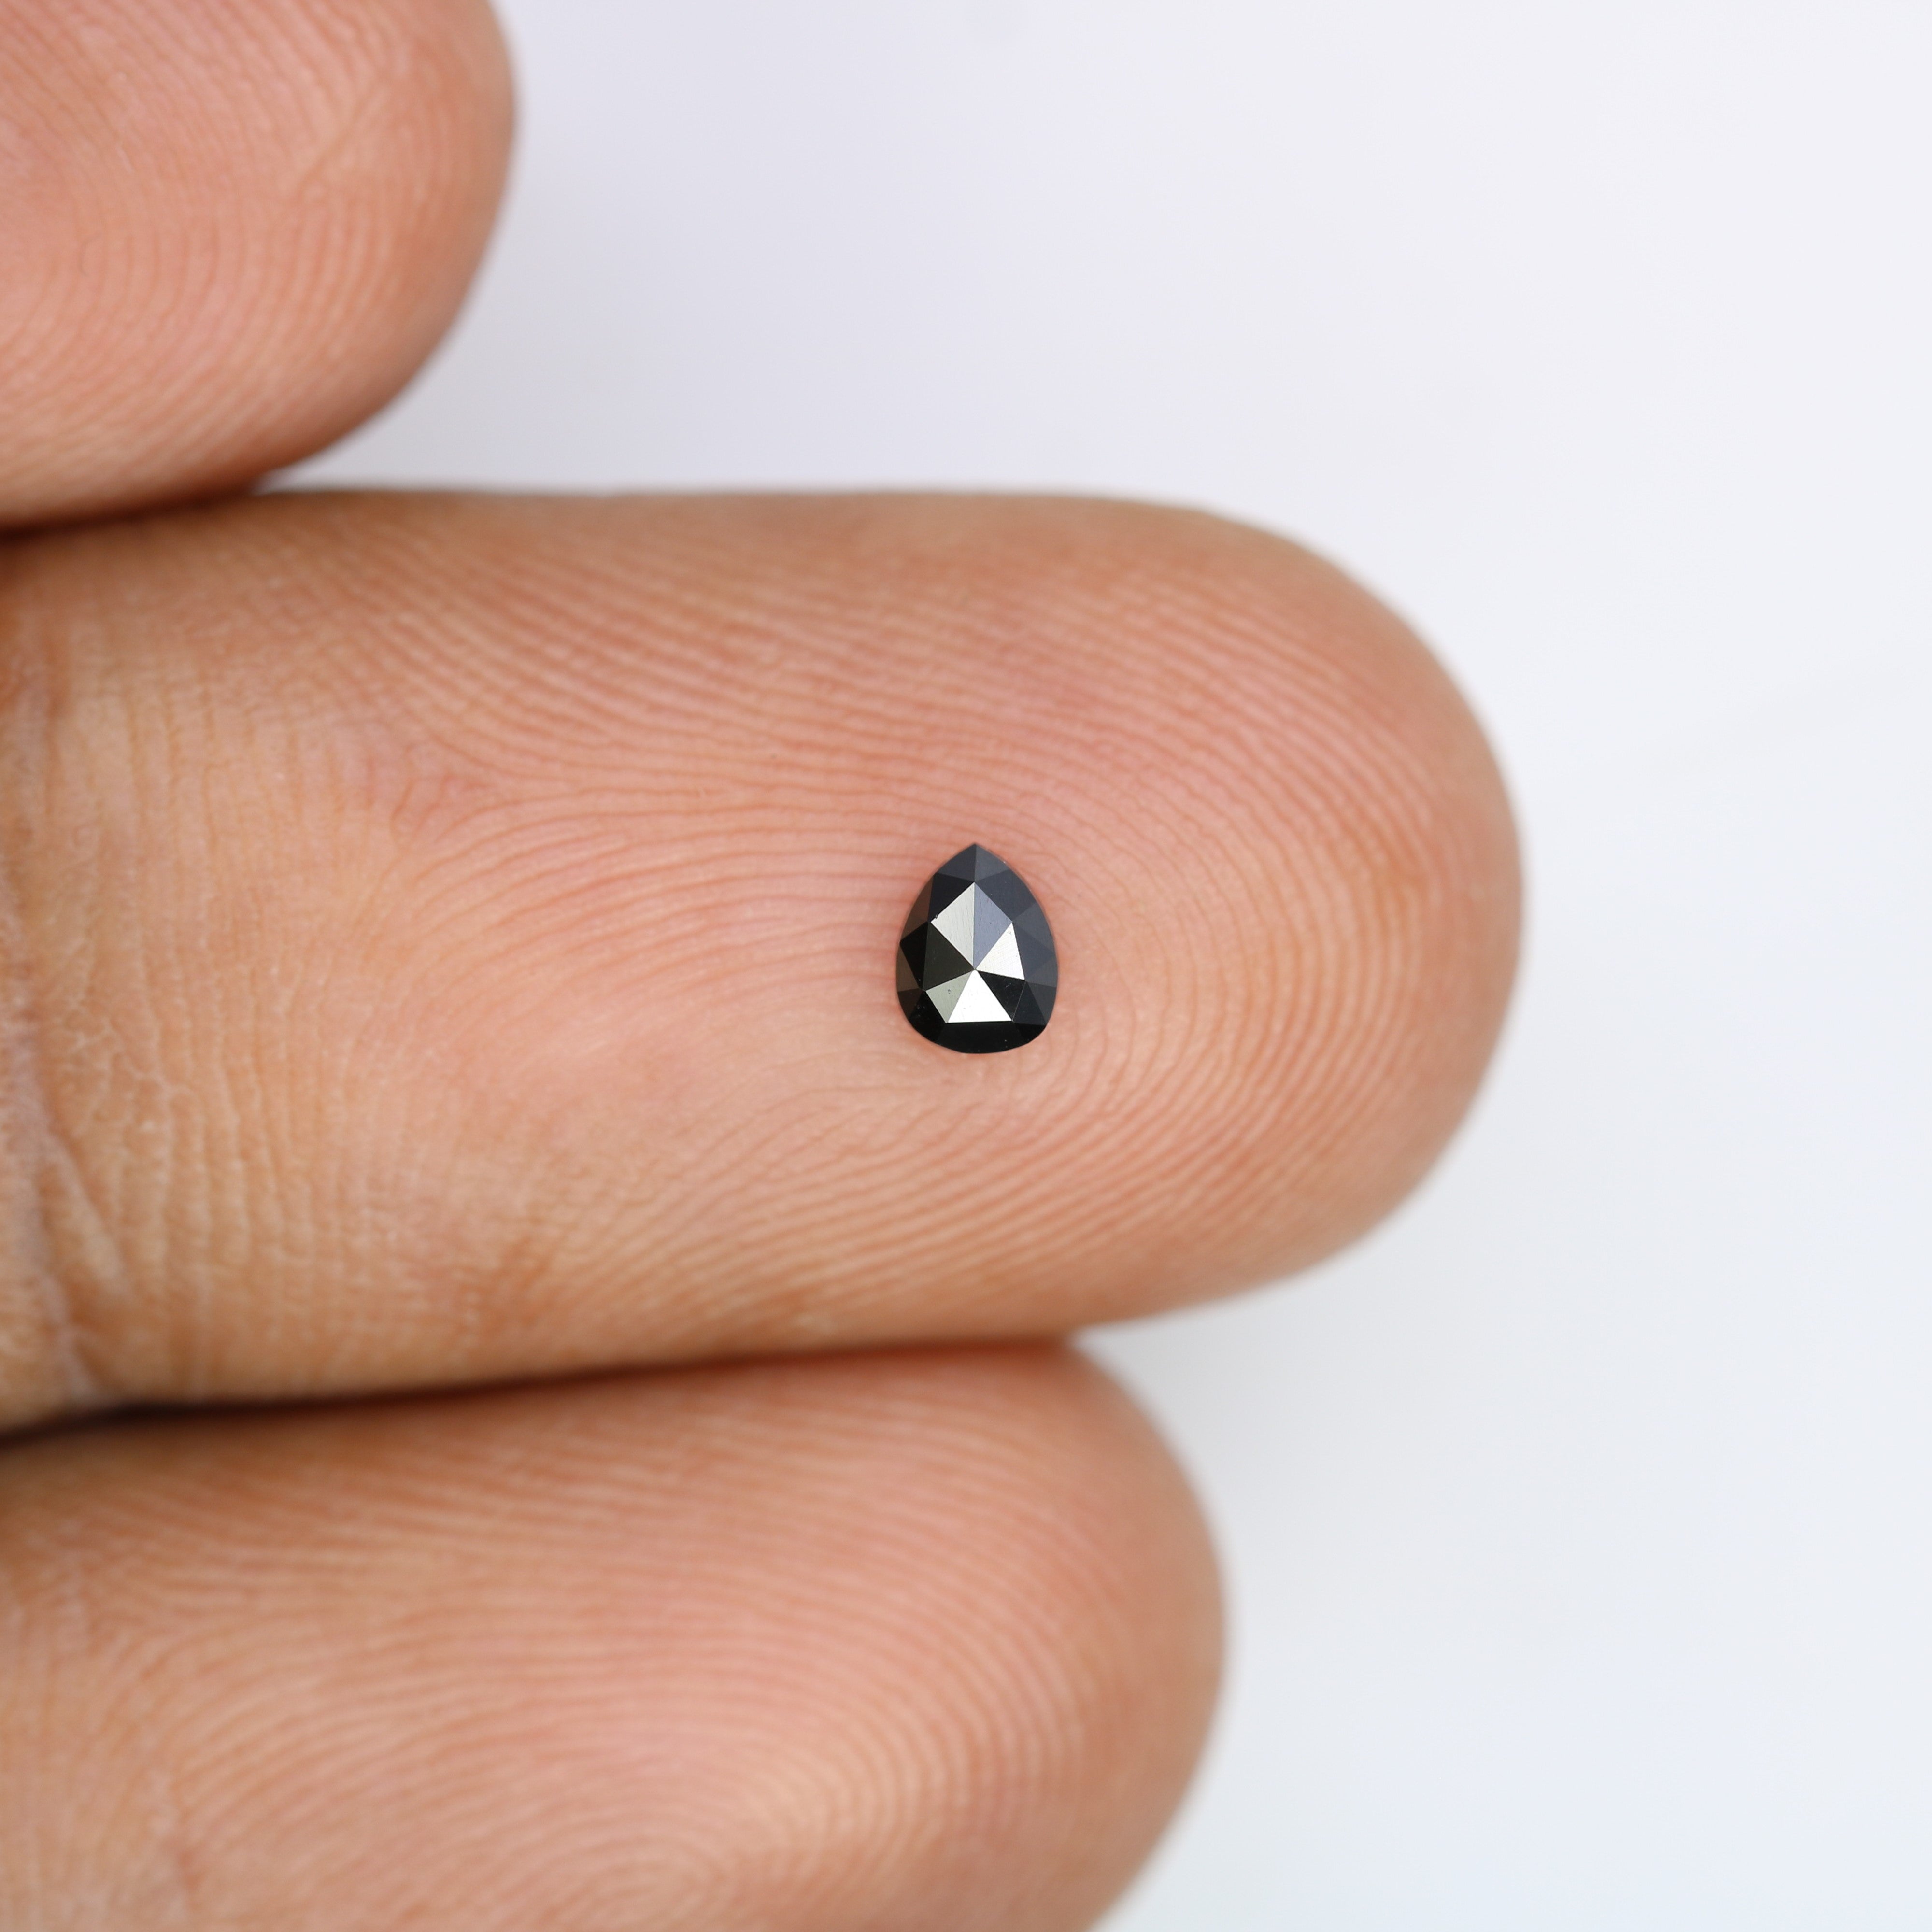 0.17 CT 4.00 MM Natural Black Pear Shape Loose Diamond For Engagement Ring